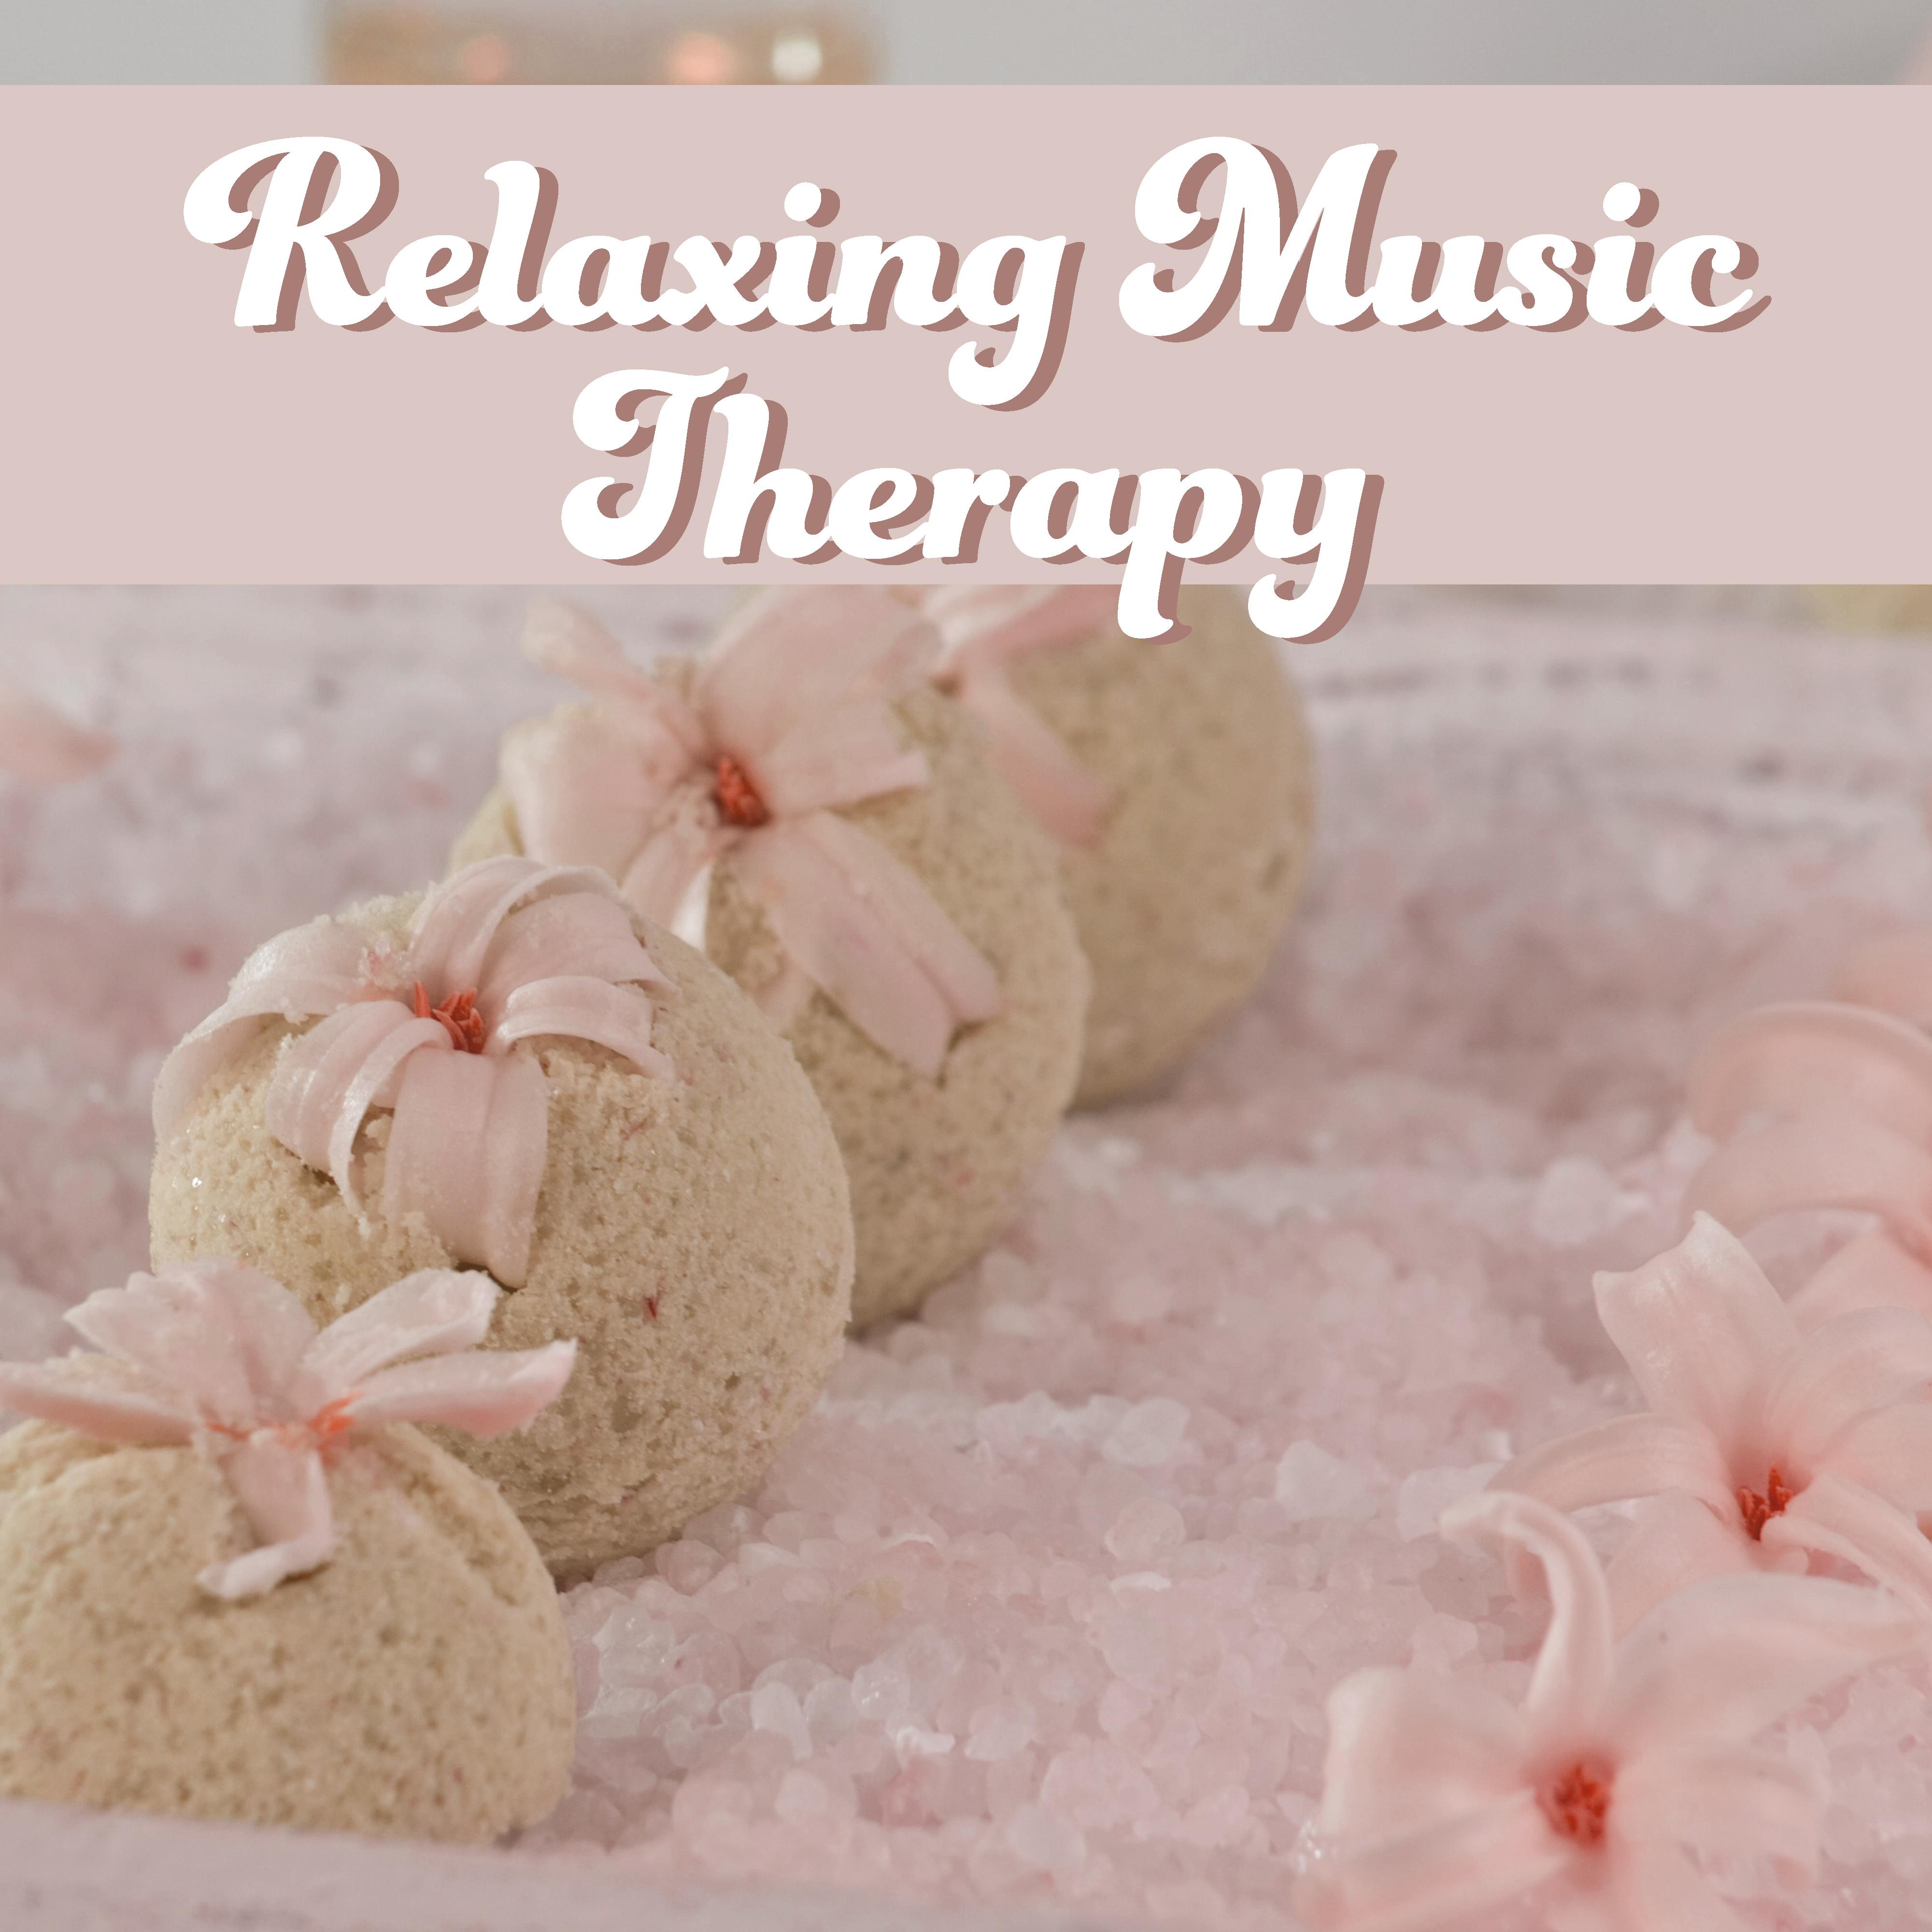 Relaxing Music Therapy – Peaceful Spa Music, Relaxing Wellness, Deep Massage, Anti Stress Music, Harmony, Calming Sounds